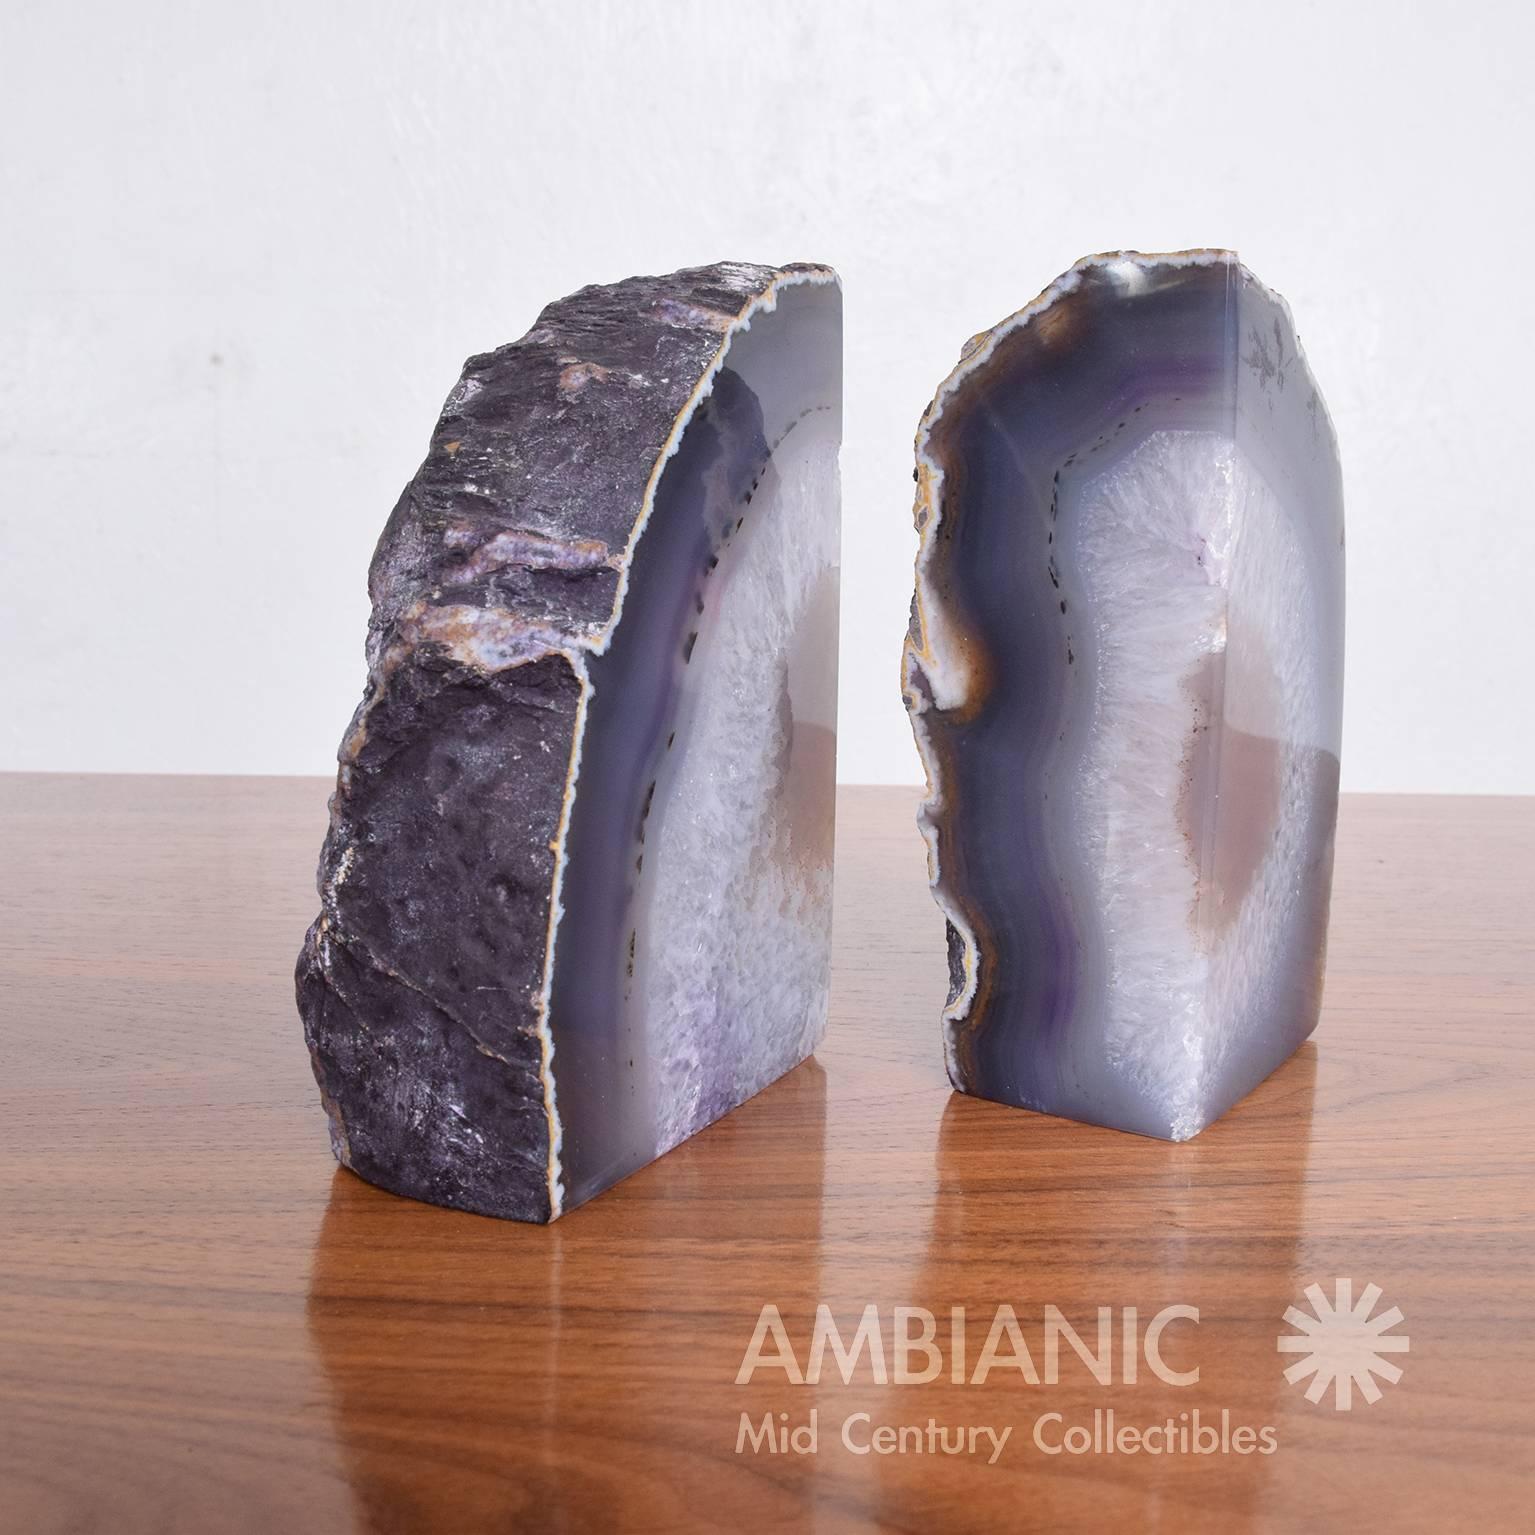 For your consideration a pair of bookends made of amethyst.

Retains stamp 